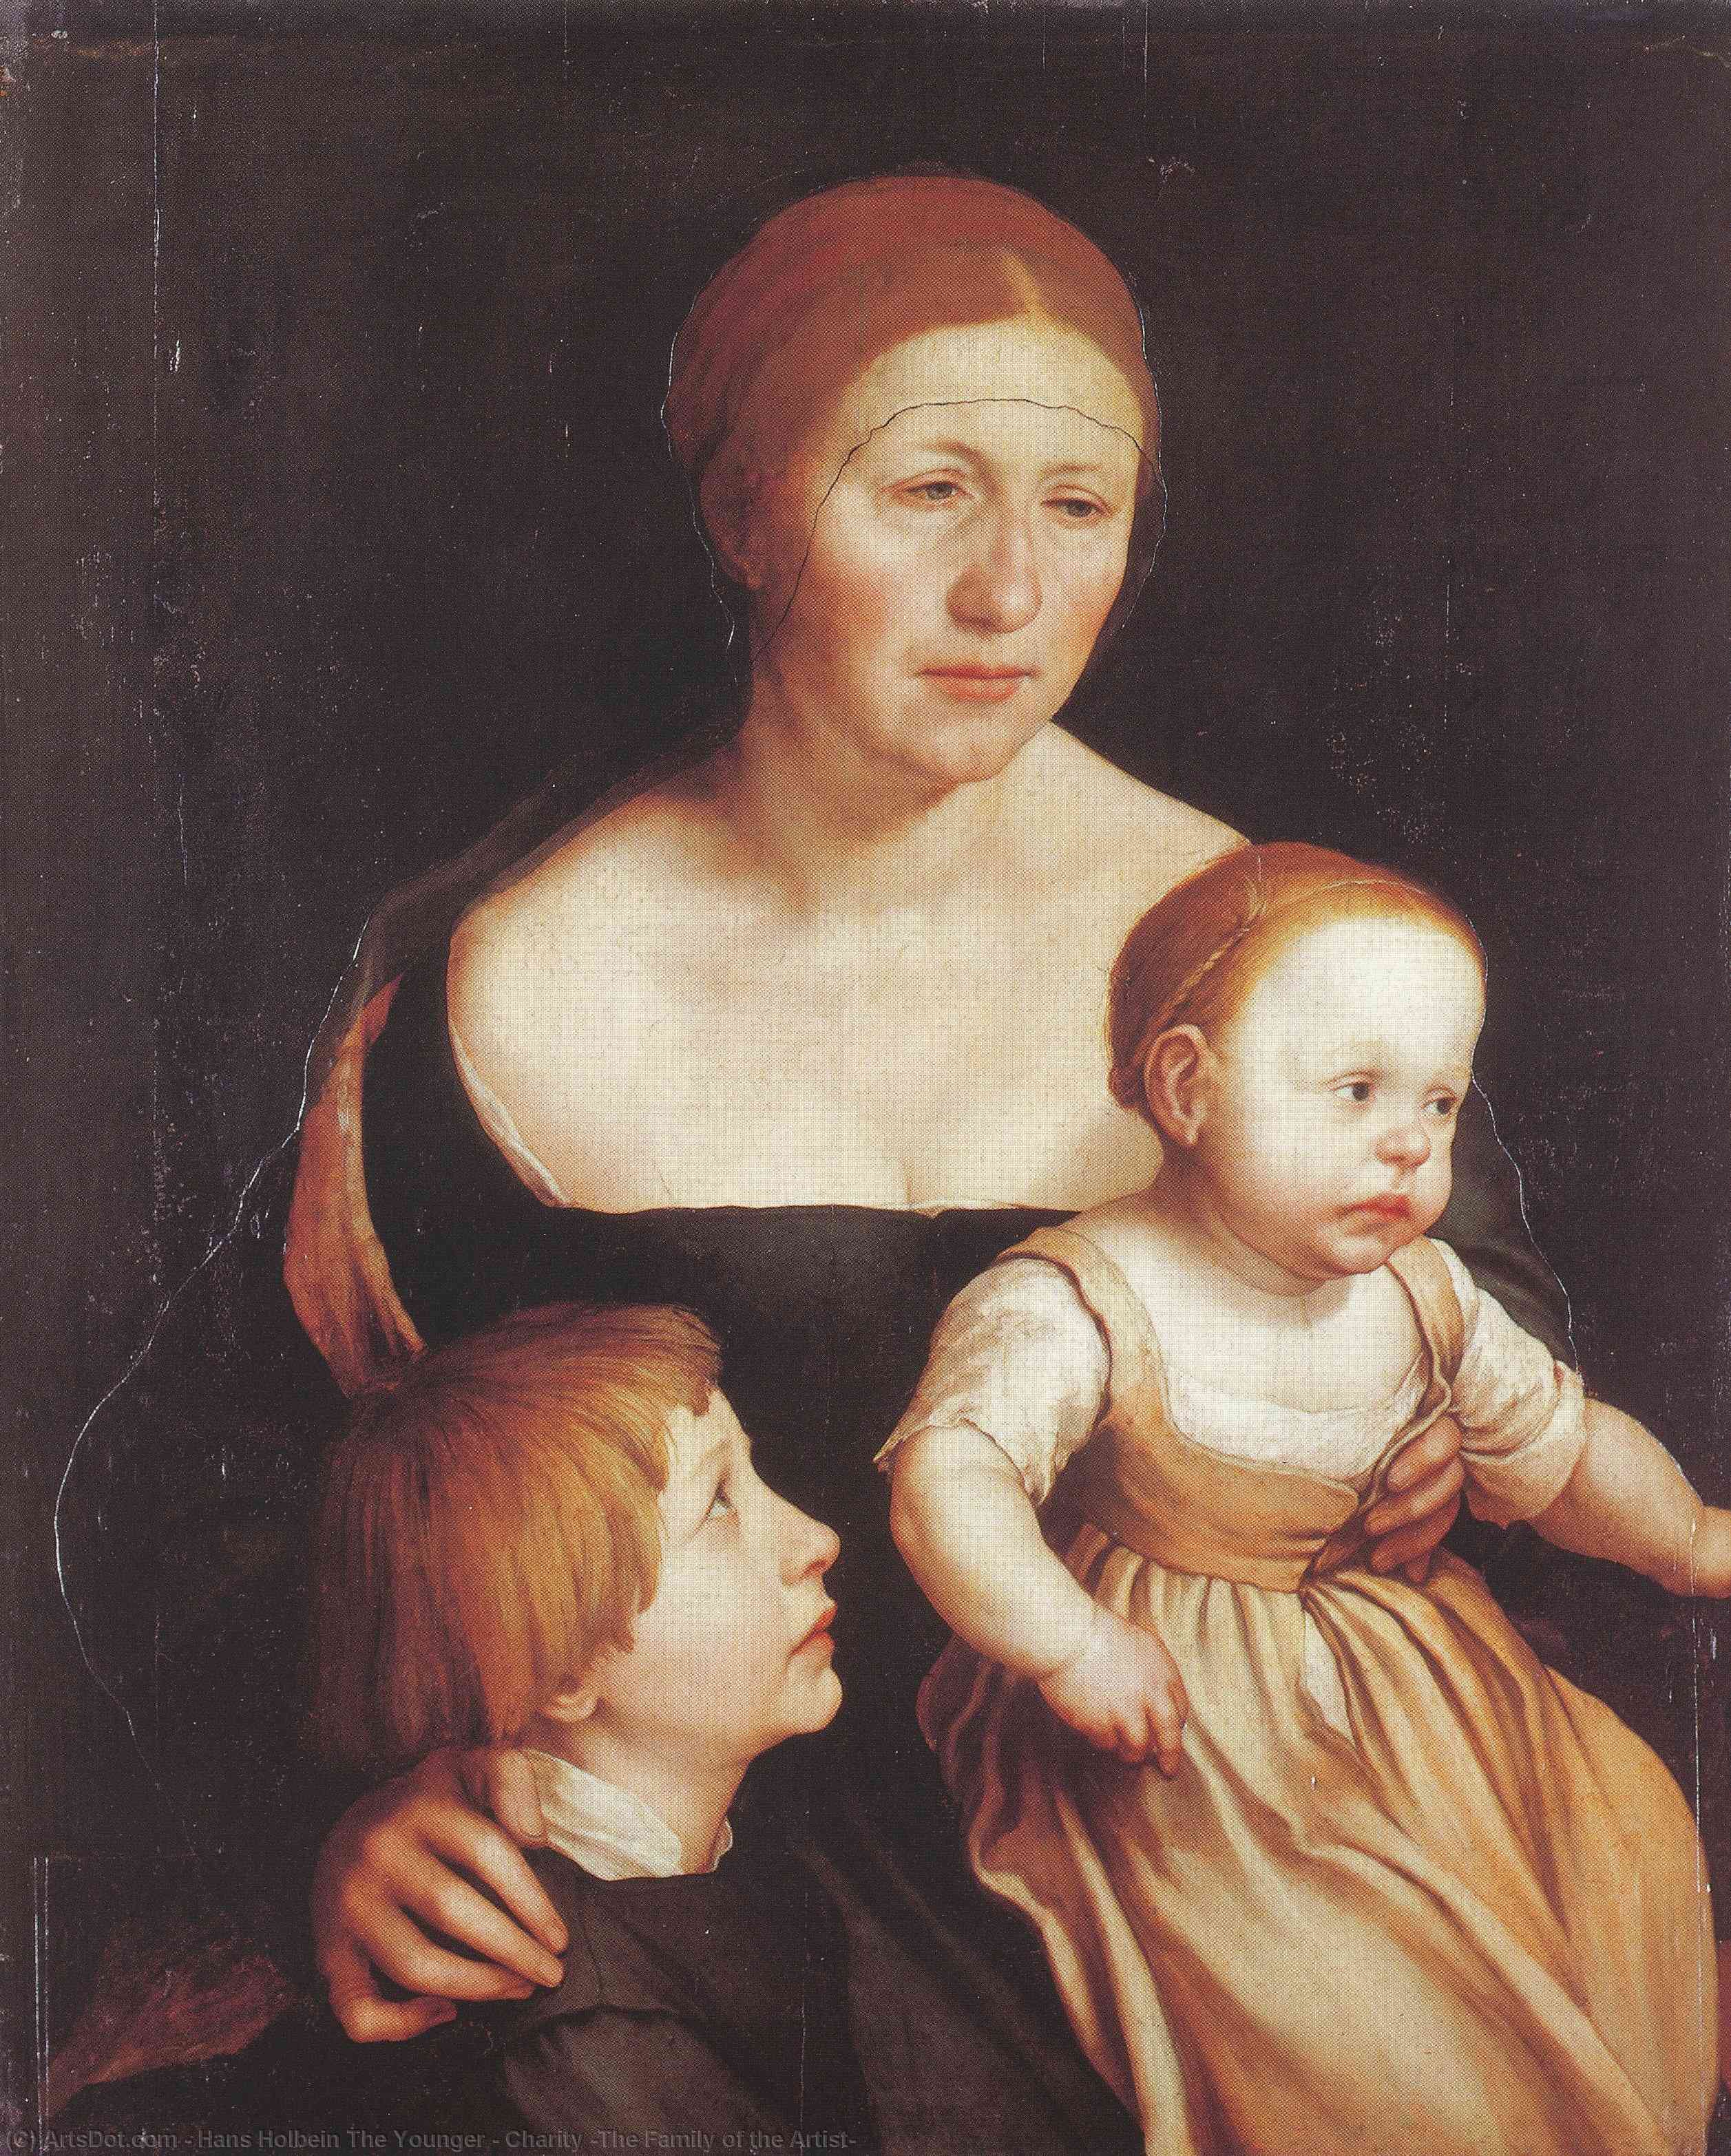 Wikioo.org - สารานุกรมวิจิตรศิลป์ - จิตรกรรม Hans Holbein The Younger - Charity (The Family of the Artist)